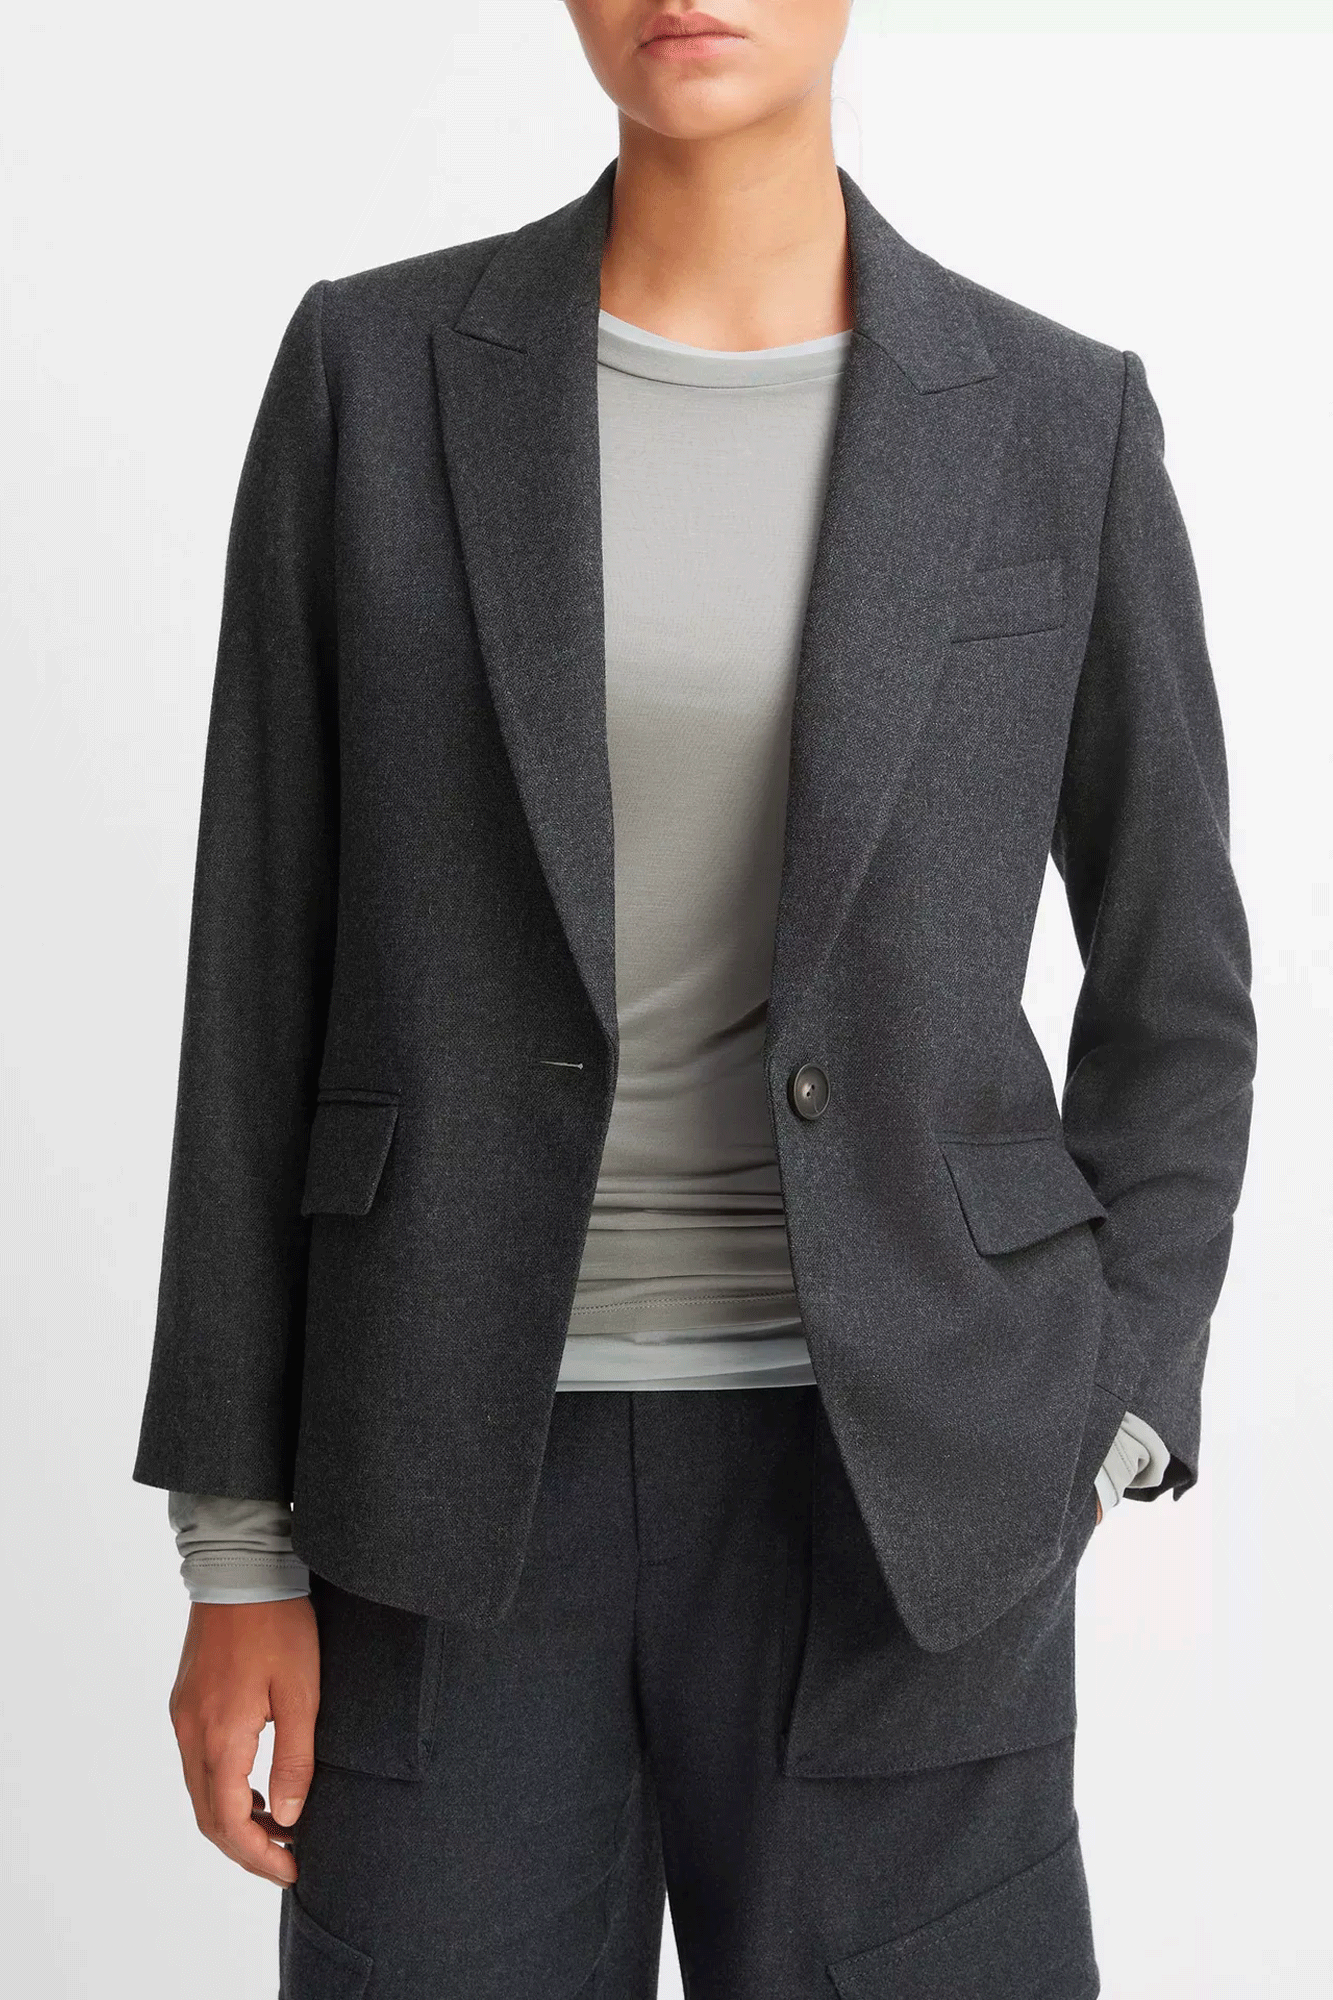 Upgrade your wardrobe with this ultra-stylish wool single-breasted blazer from Vince. Expertly crafted from luxurious brushed wool that provides a soft finish and maximum comfort. Featuring a cutaway detail for ease of movement, this timeless, elevated take on tailoring will have you looking sharp for any occasion.